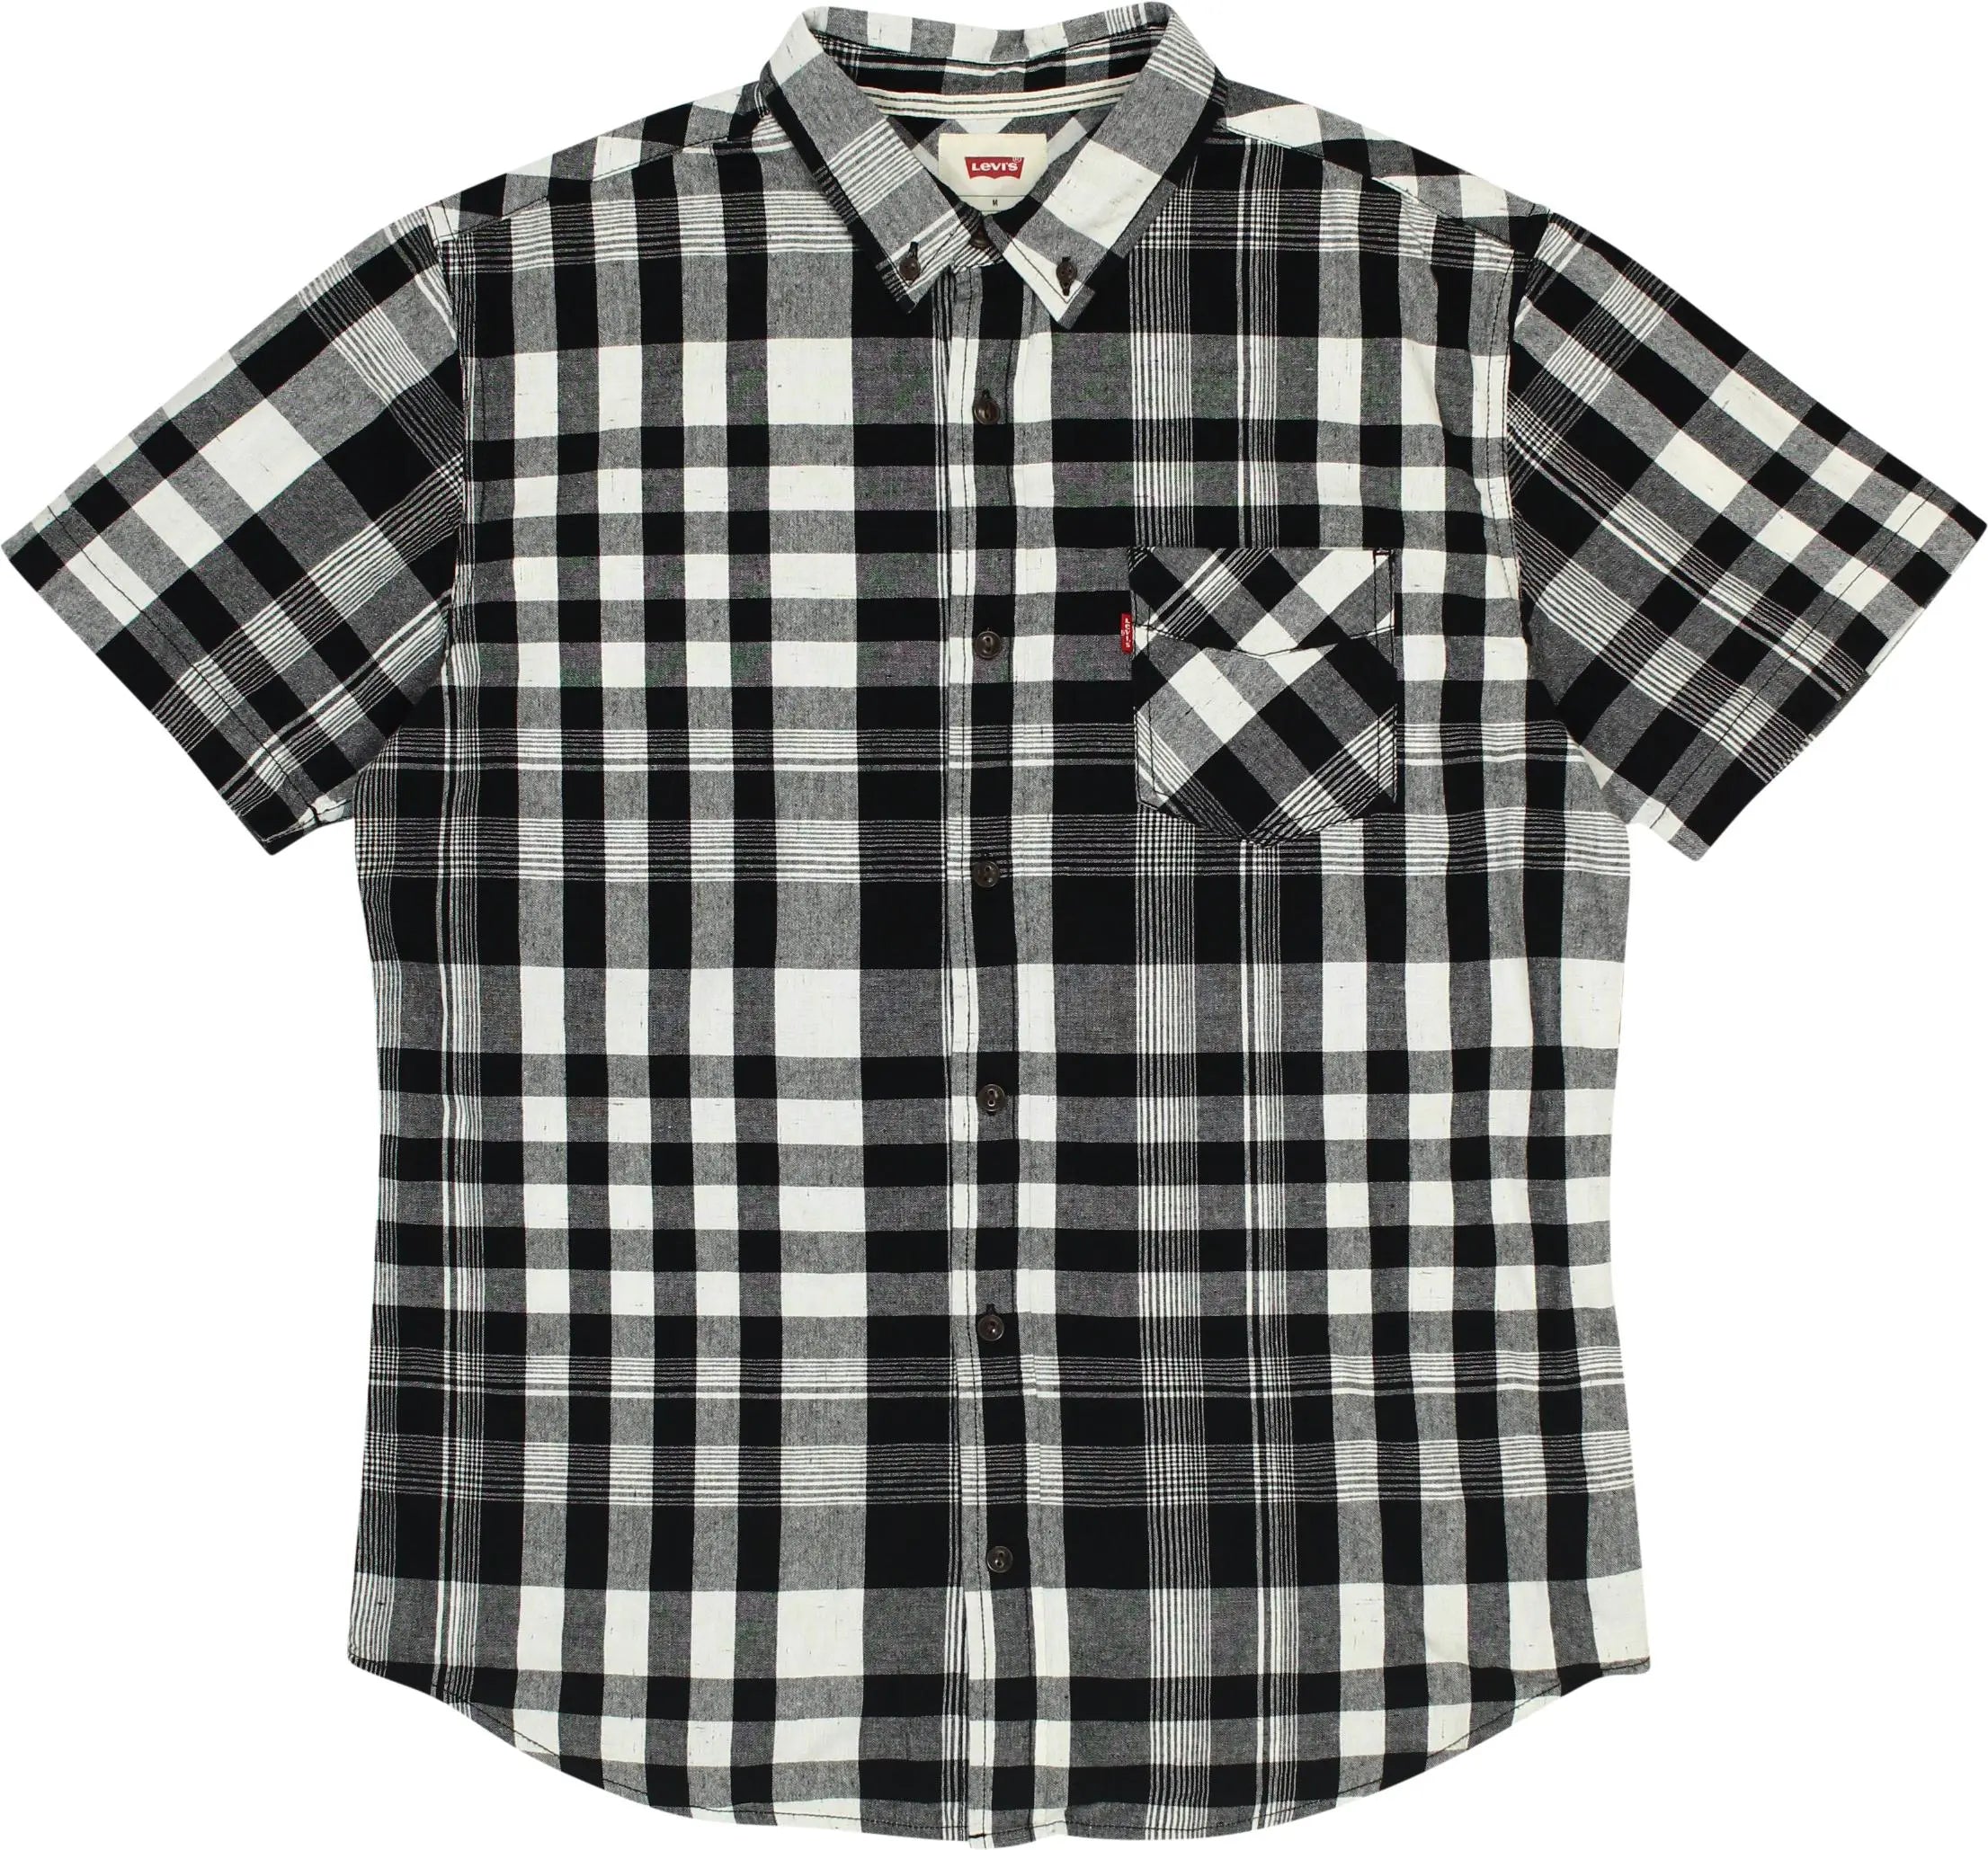 Levi's - Checkered Short Sleeve Shirt by Levi's- ThriftTale.com - Vintage and second handclothing